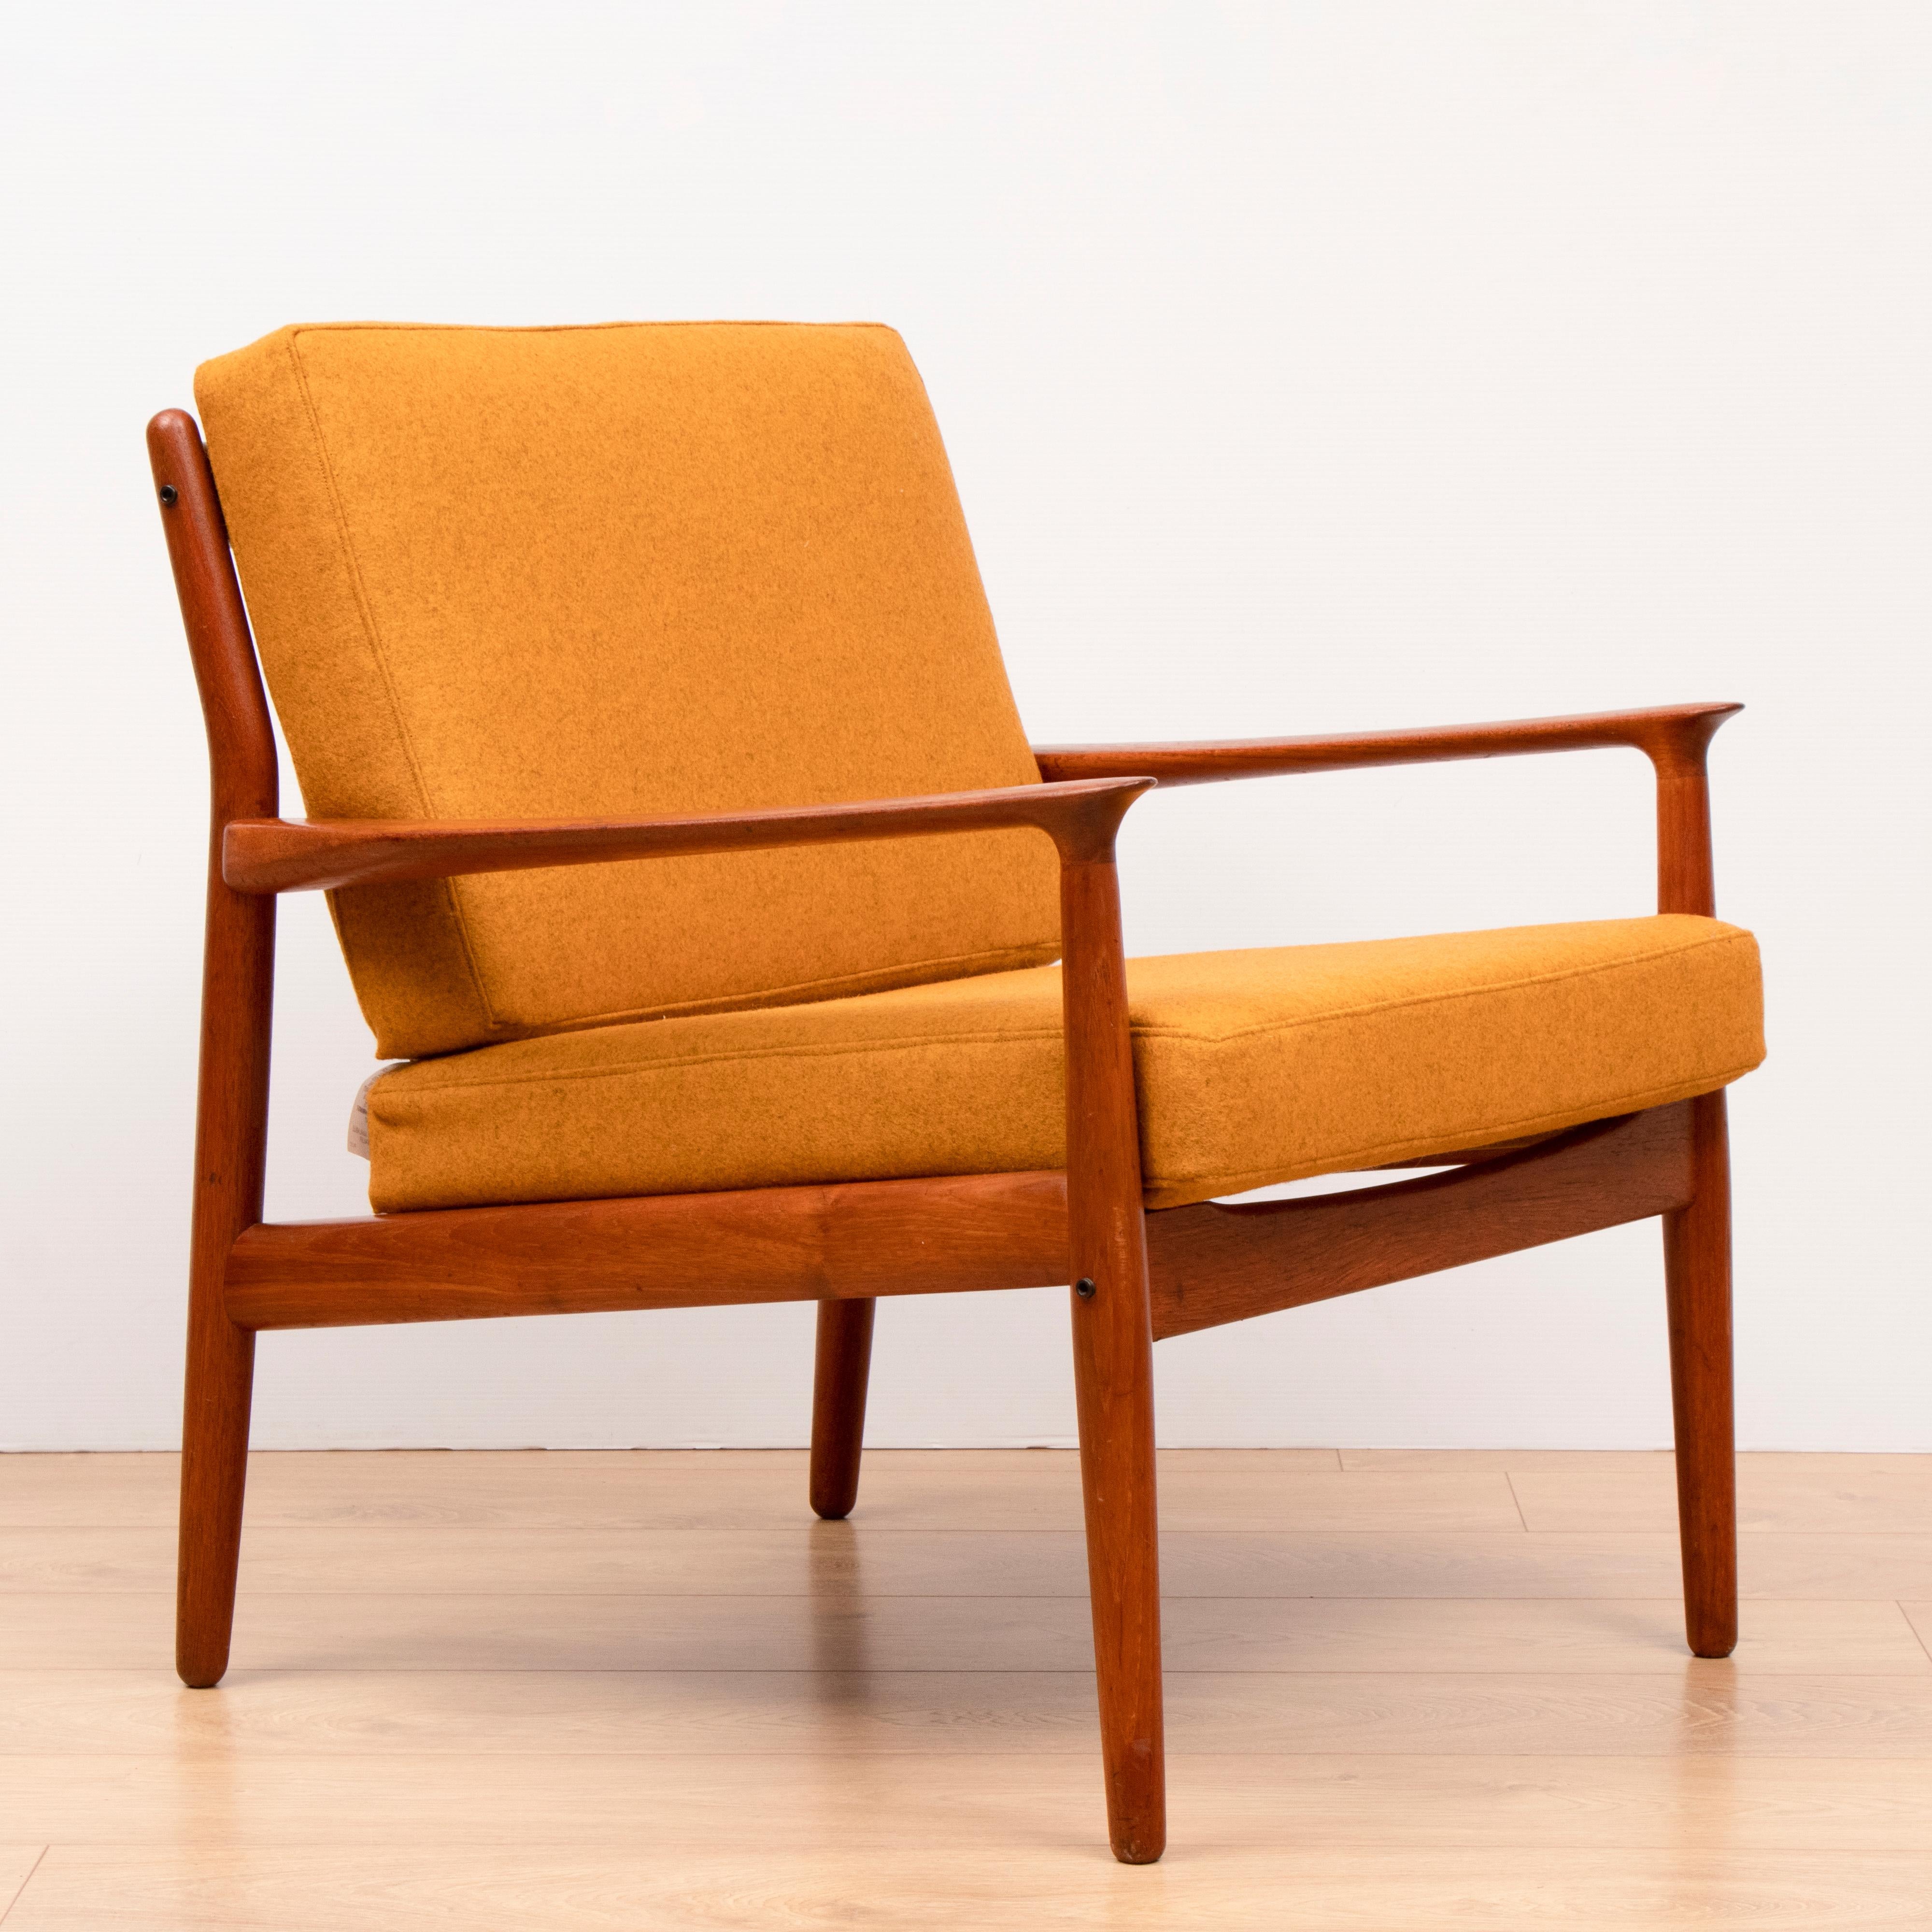 Pair of Grete Jalk solid Teak lounge armchairs re-upholstered in a mustard yellow wool fabric. The chairs were manufactured in Denmark by Glostrup Møbelfabrik during the 1950s. This specific model is one of the most sought after incorporating a